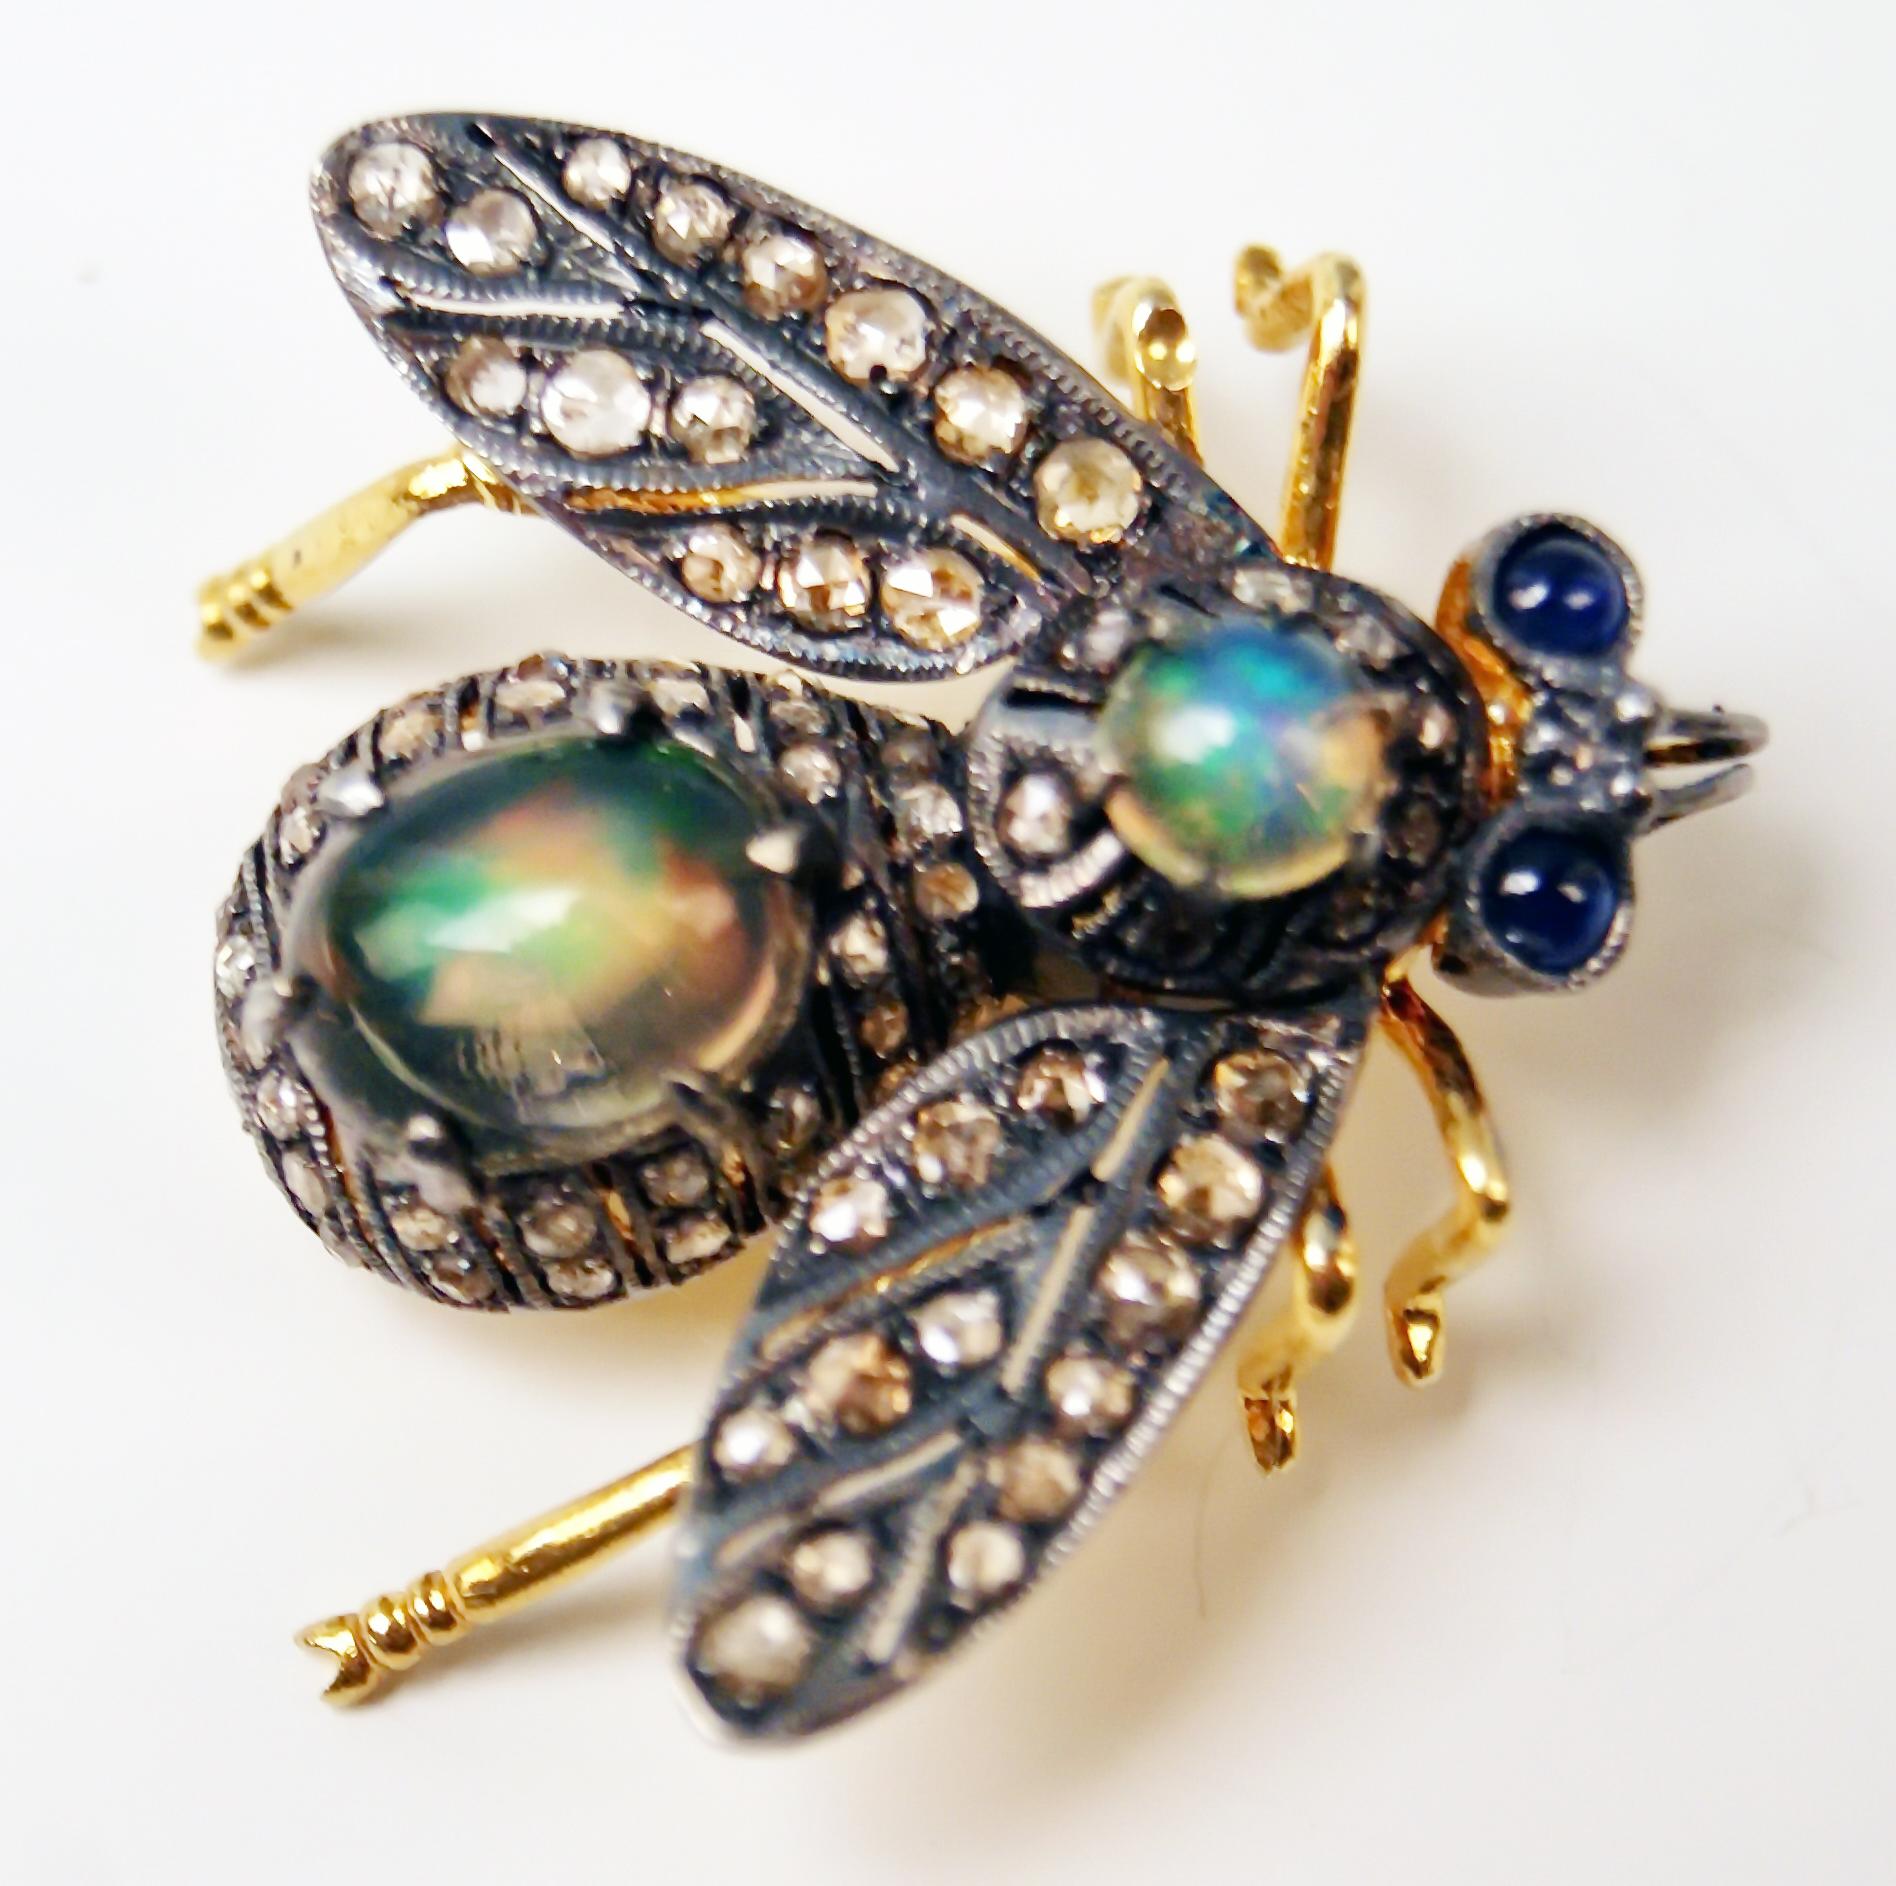 Rare jewellery piece made around Turn of Century (1900):
The brooch is shaped as bee, being abundantly covered with diamonds. Additionally, this nicest yellow golden jewellery piece is covered with two opals as well as with two blue sapphires which